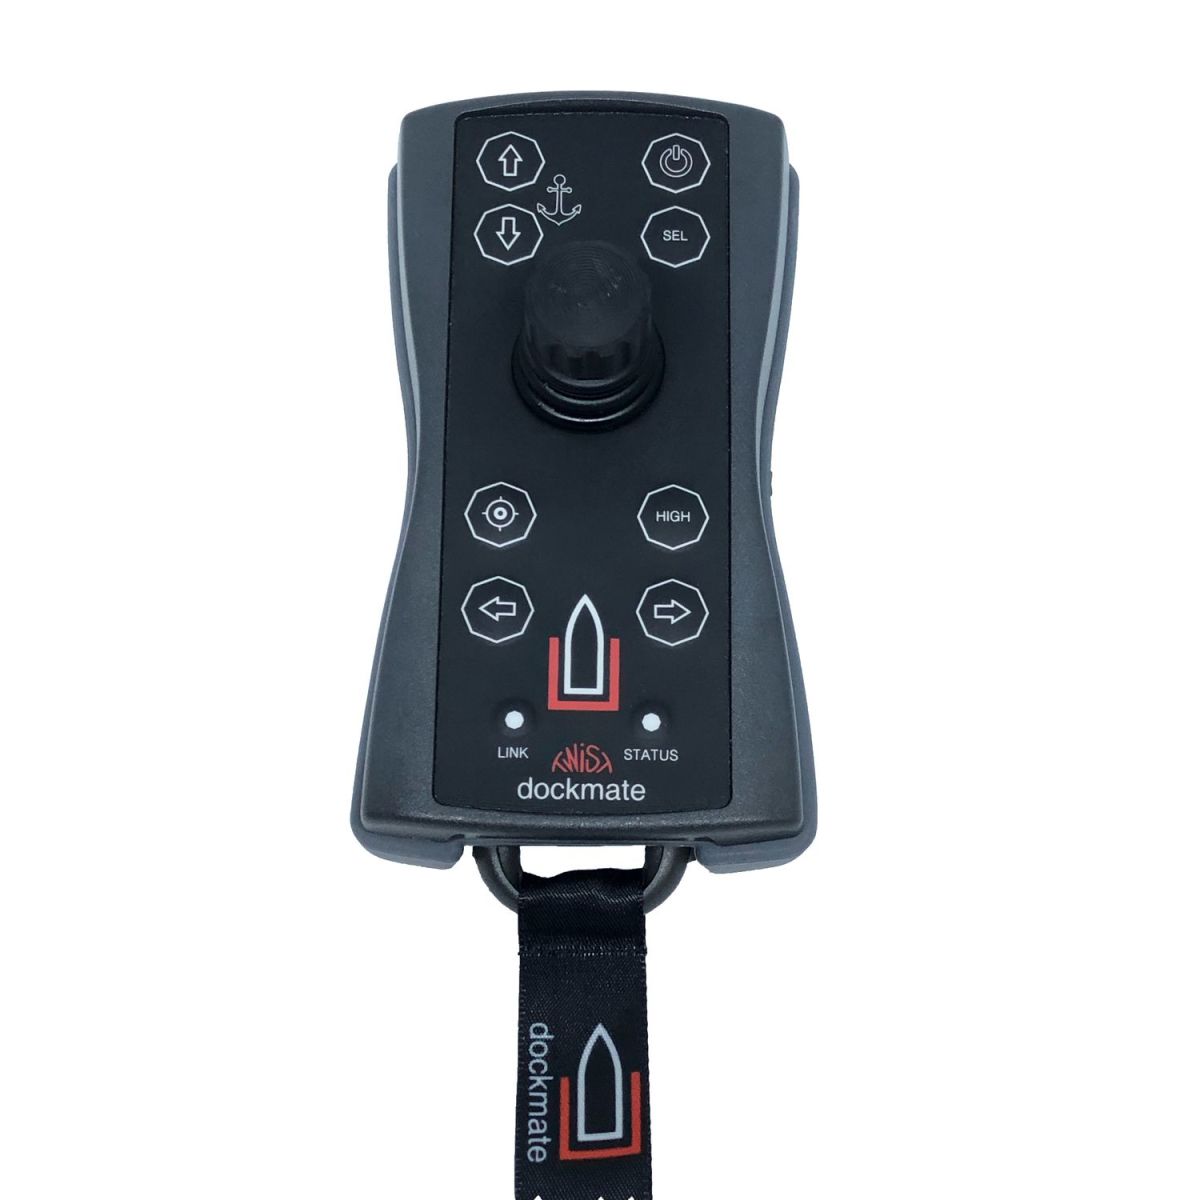 The Dockmate wireless remote works with Volvo Penta’s inboard, stern drive and IPS systems.